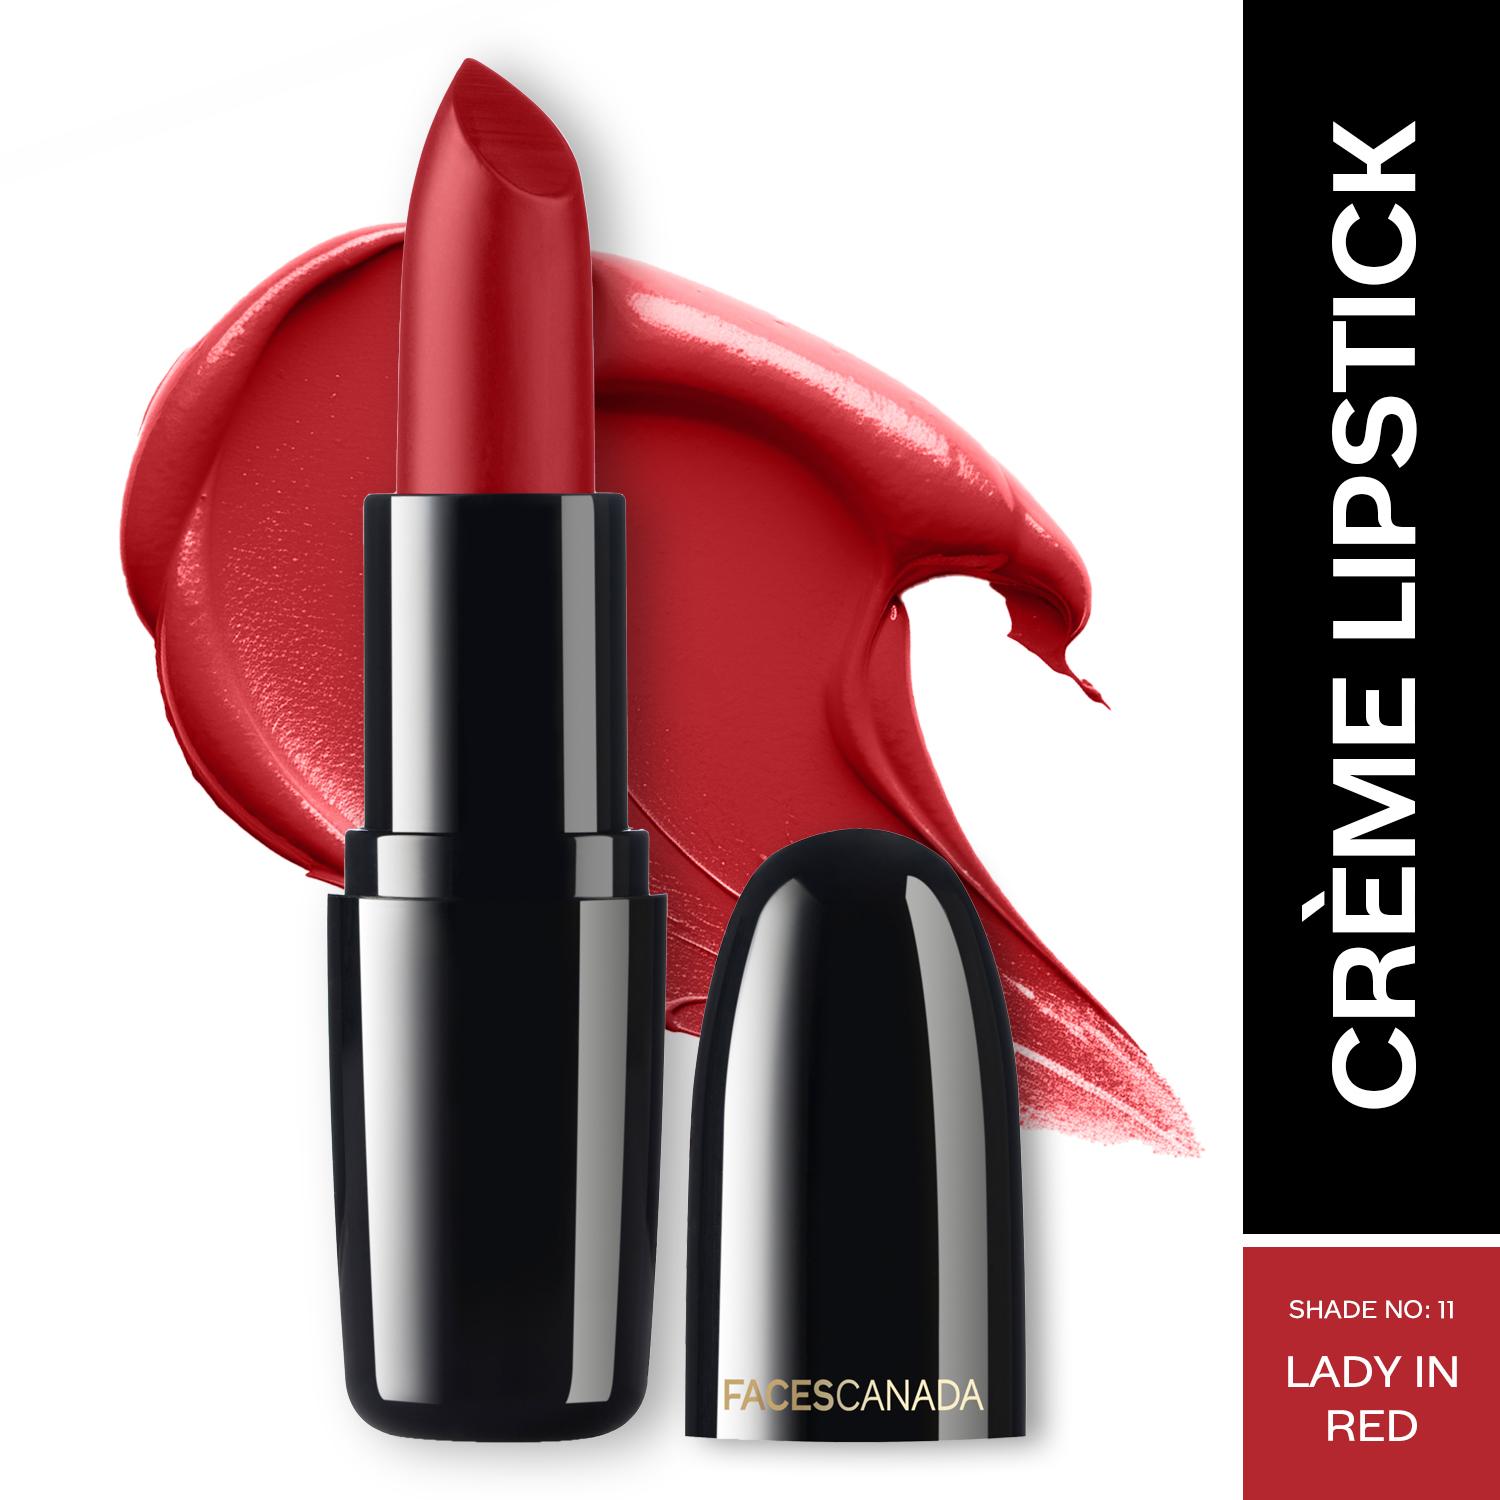 Faces Canada | Faces Canada Weightless Creme Finish Lipstick, Creamy Finish, Hydrated Lips - Lady in Red 11 (4 g)